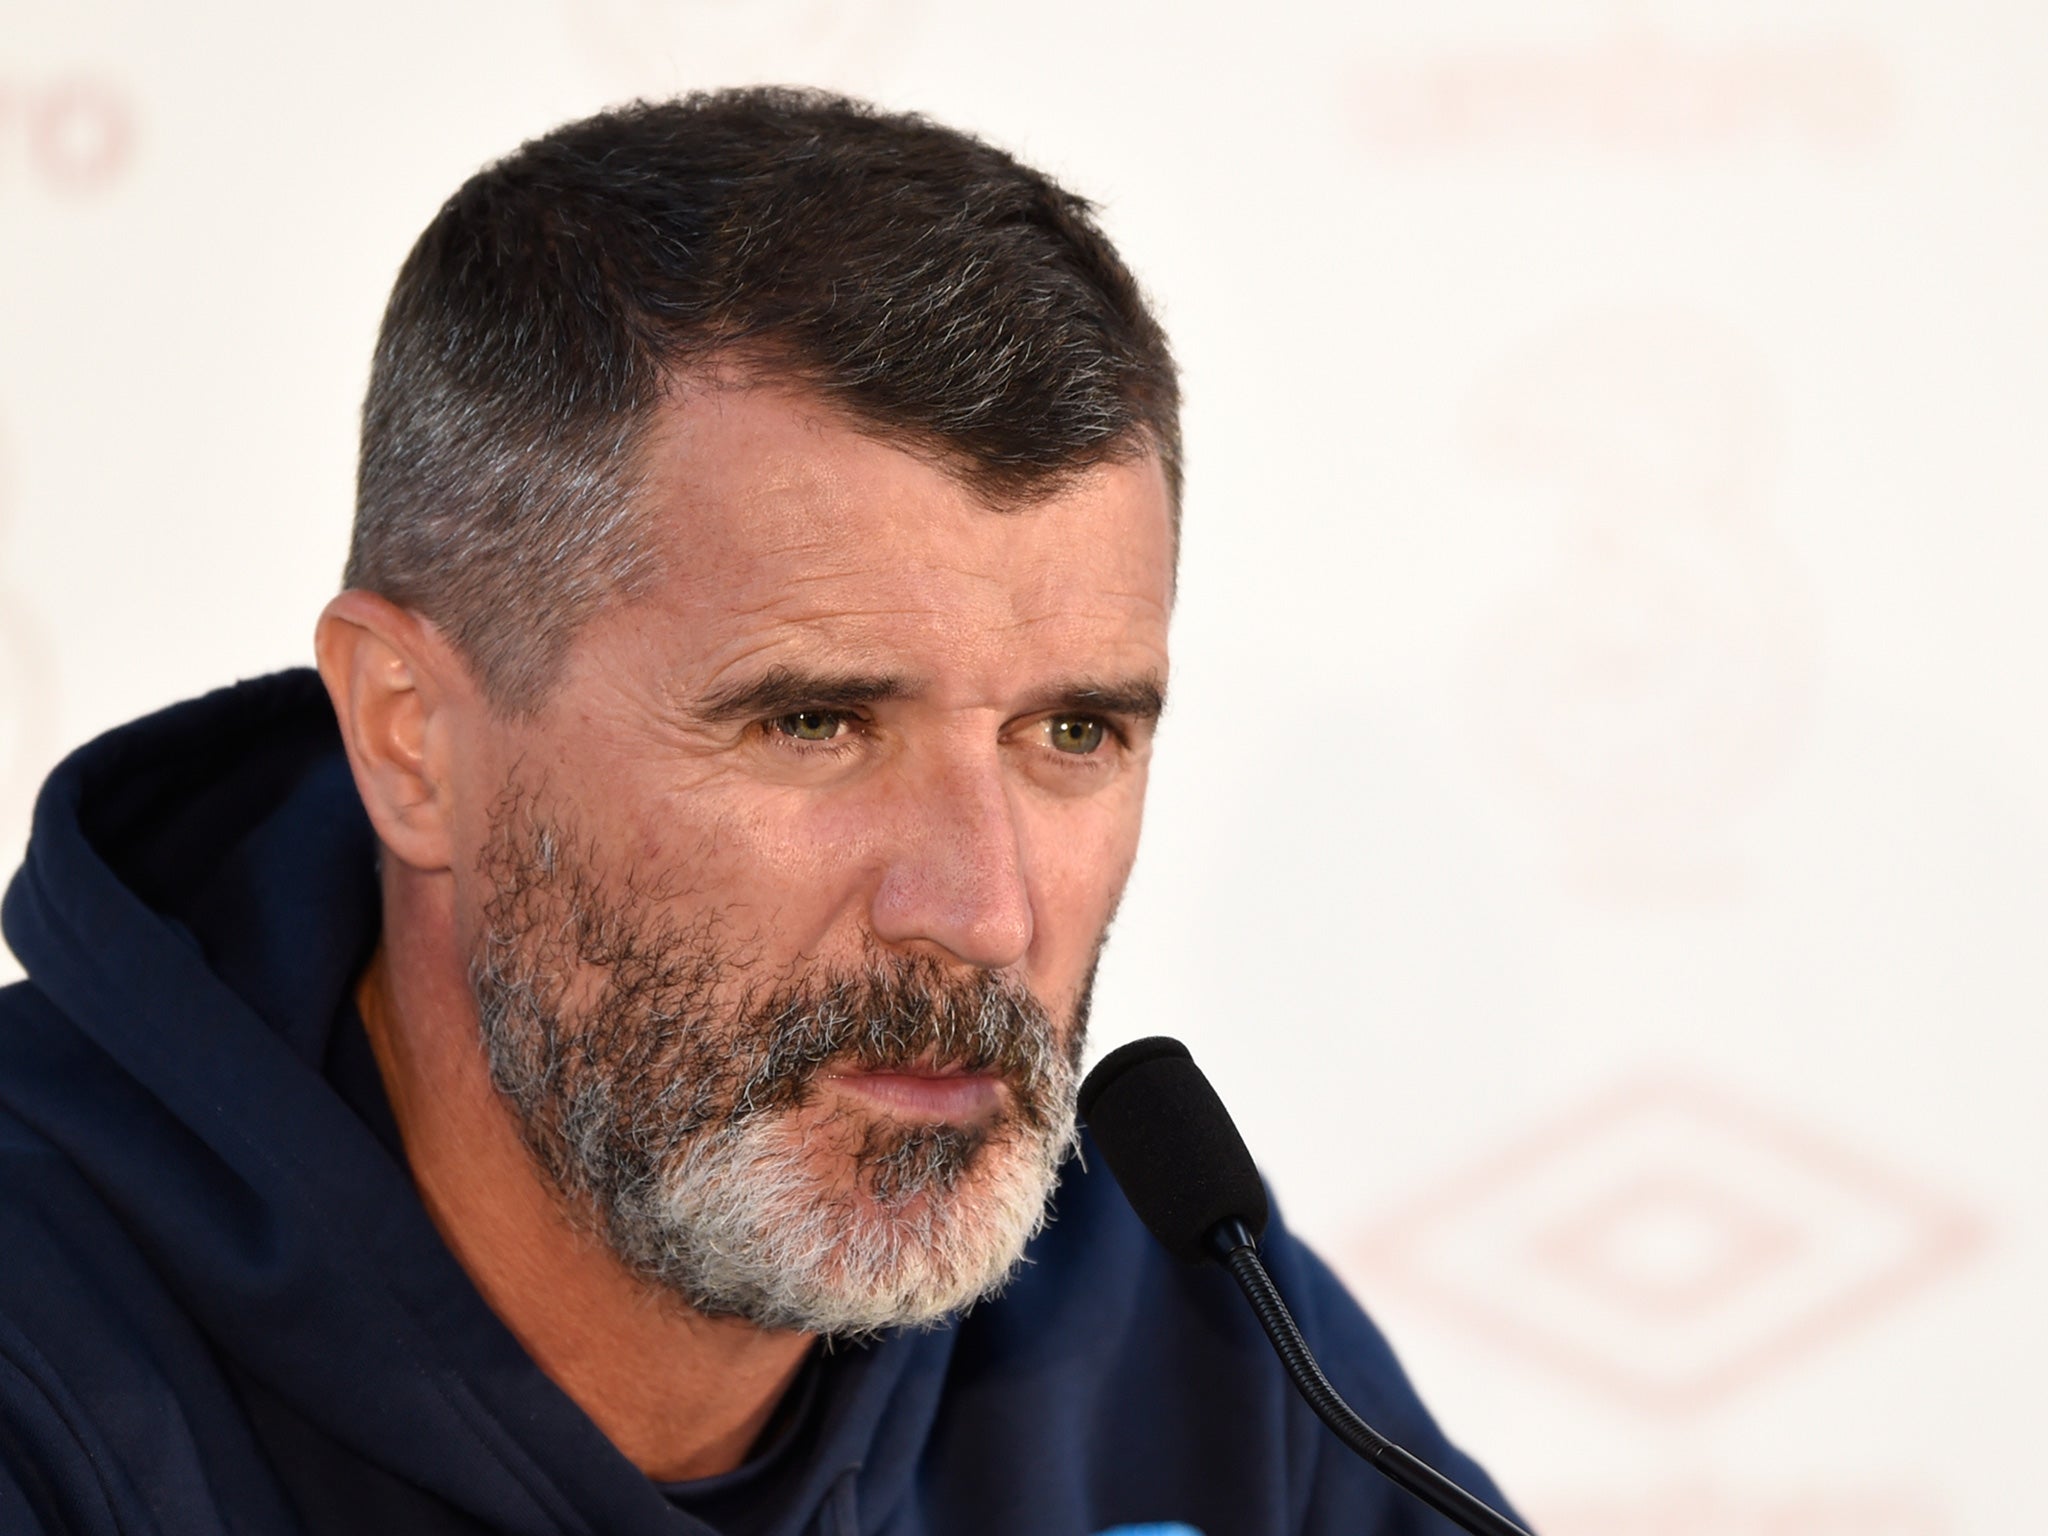 Keane claimed to have feared that Everton players would "turn up on crutches"